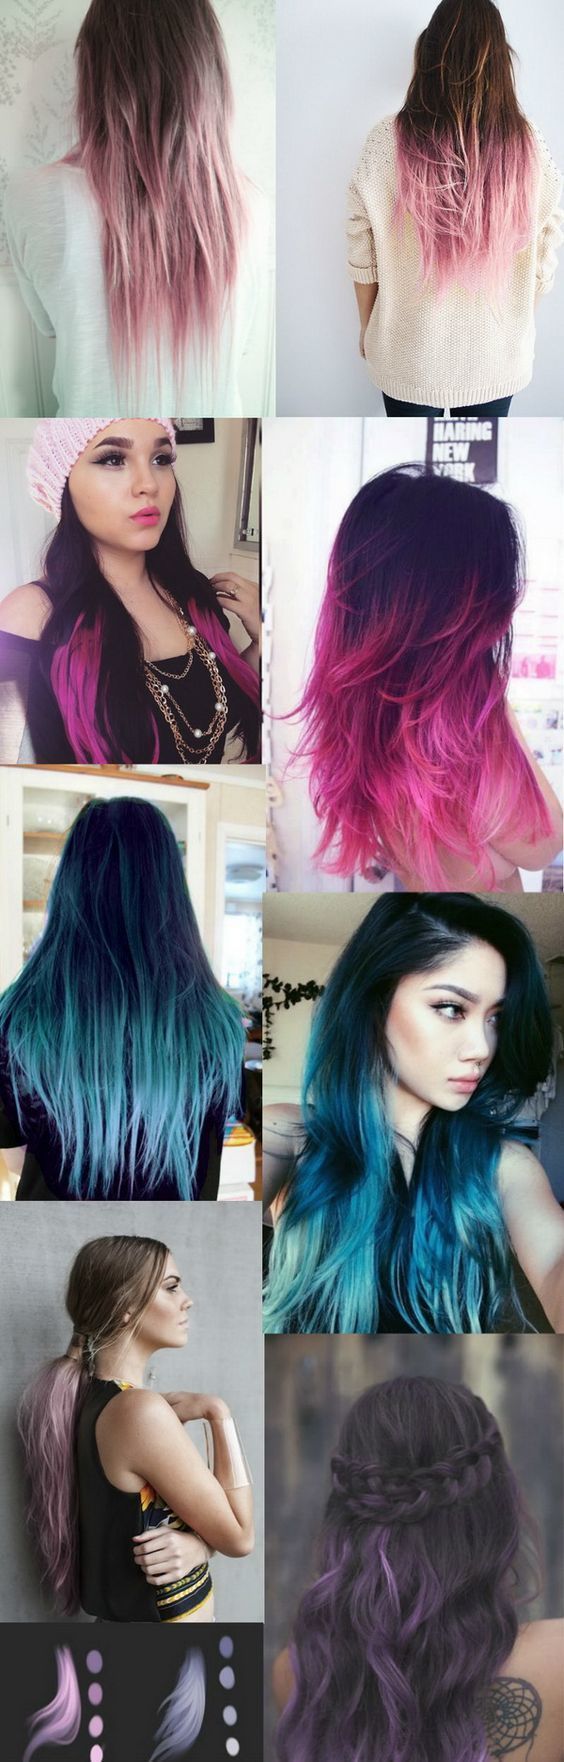 1467606483 pastel ombre hairstyles